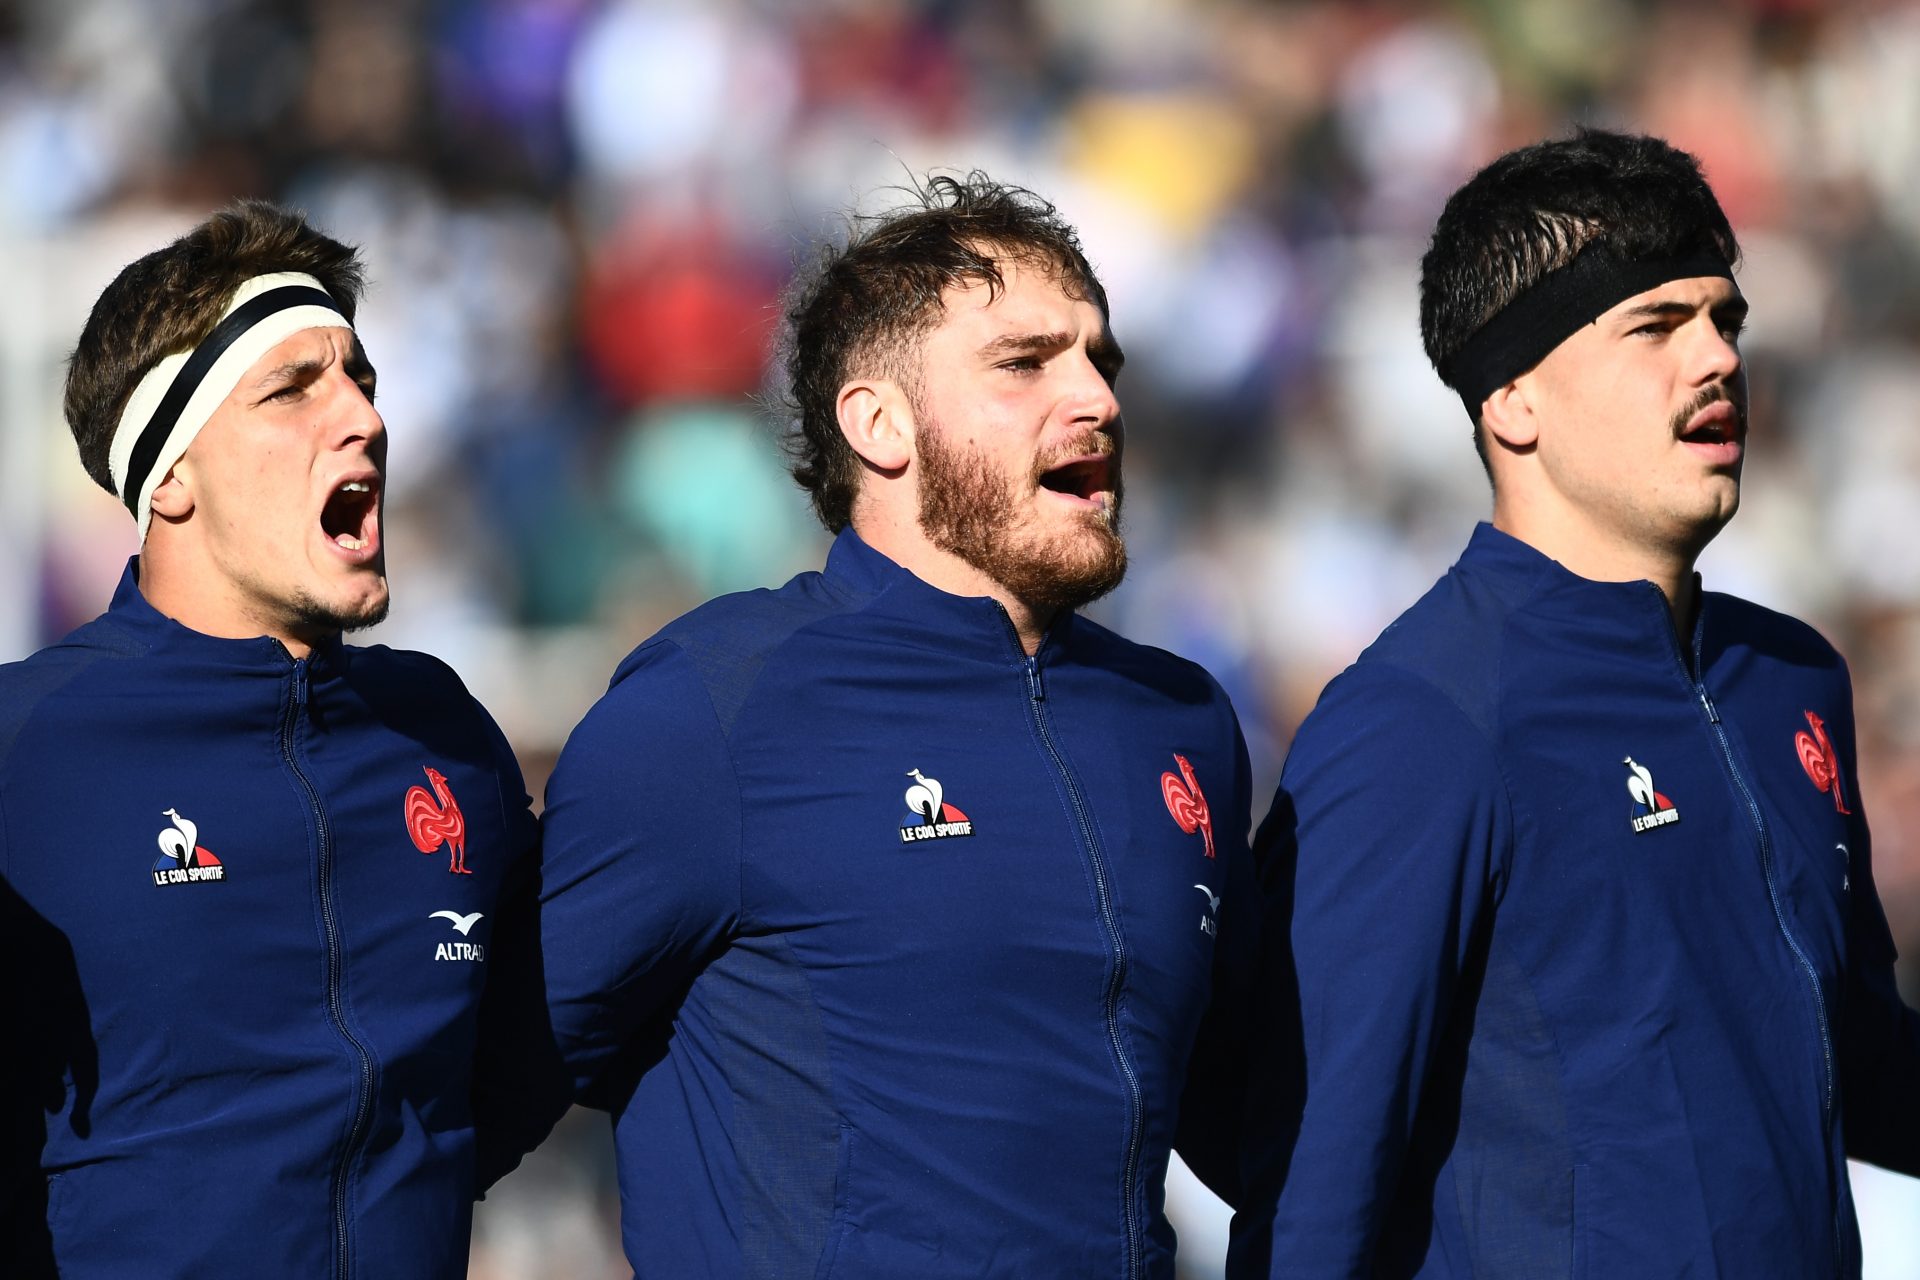 Another French rugby scandal